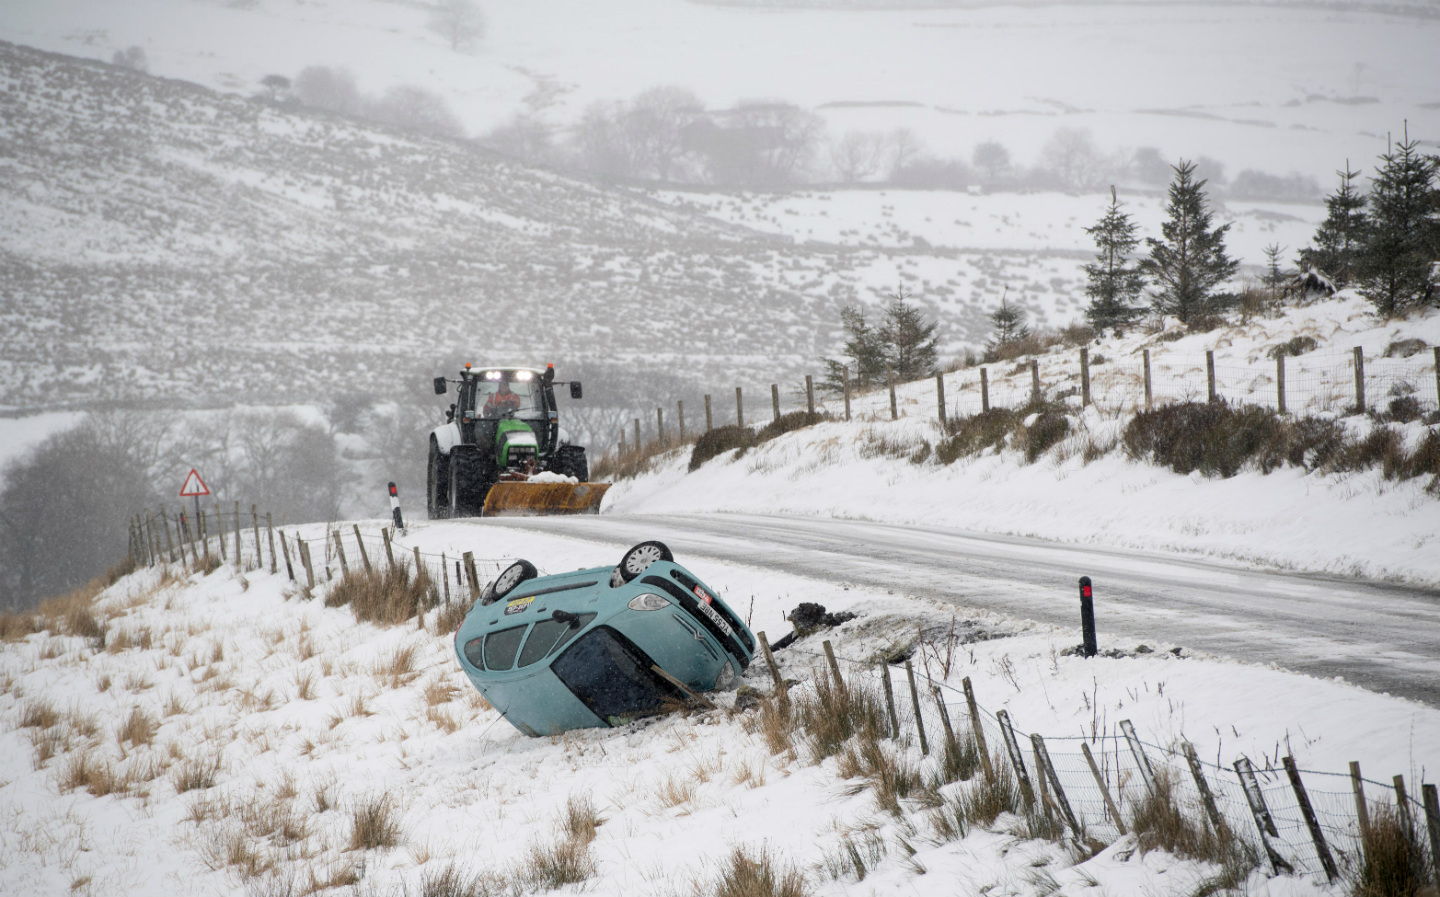 Big excess won’t cut insurance cost, drivers warned